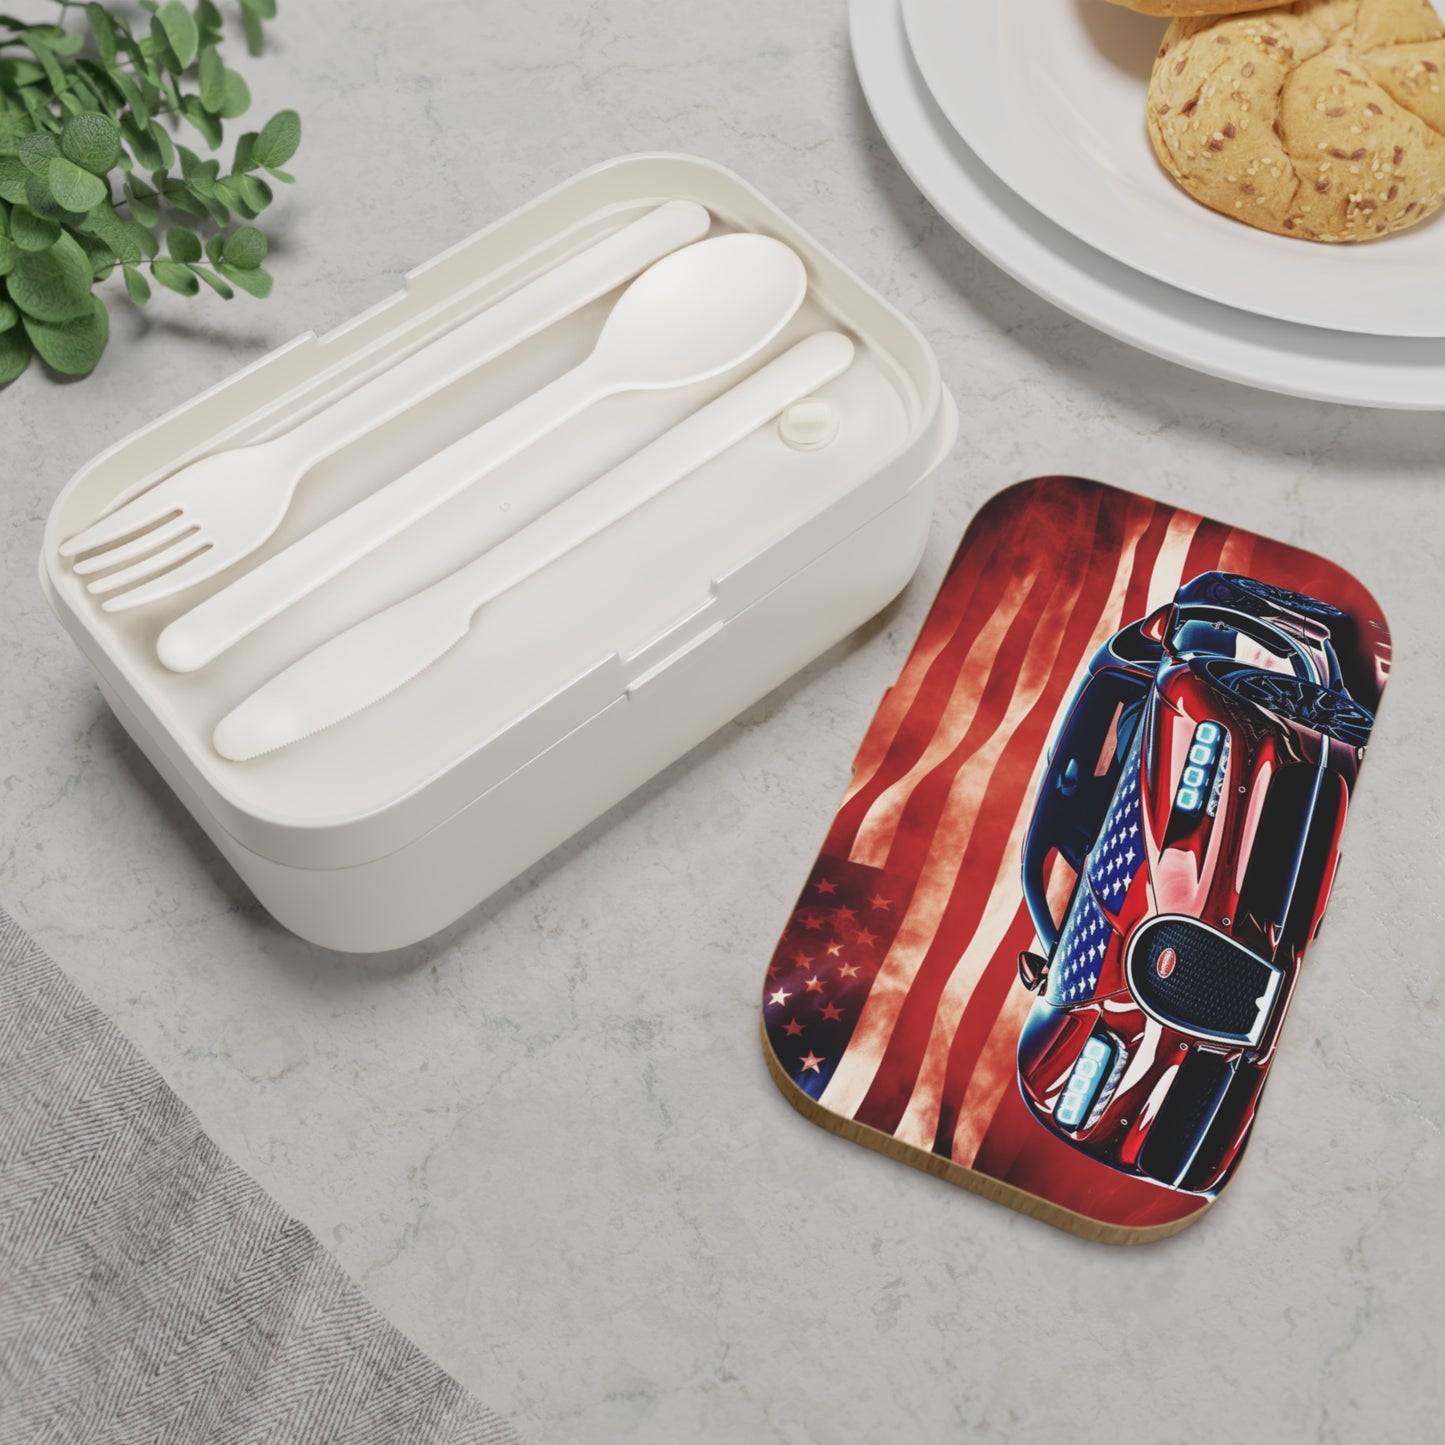 Bento Lunch Box Abstract American Flag Background Bugatti 3